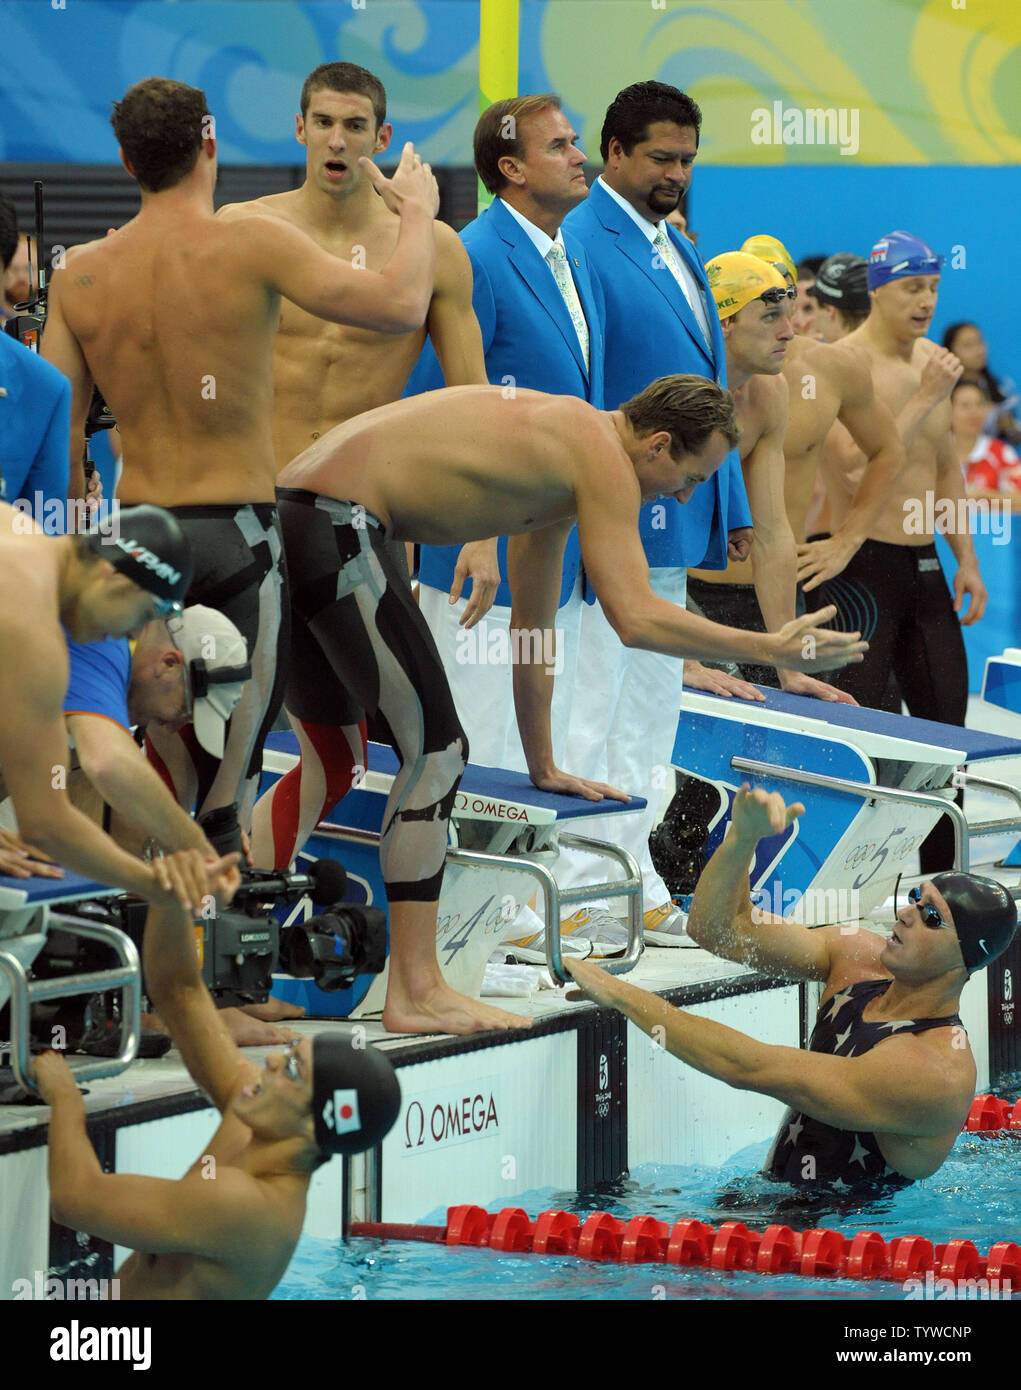 USA's team congratulates each other after winning the Men's 4x100M Medley, setting a world record of 3:29.34, at the National Aquatic Center (Water Cube) during the 2008 Summer Olympics in Beijing, China, on August 17, 2008.  Michael Phelps (top center) moves to shakes hands with Brendan Hansen while Aasron Peirsol leans down to congratulate the final swimmer Jason Lezak. Phelps set the world record for medals in a single Olympics with 8, passing Mark Spitz.    (UPI Photo/Roger L. Wollenberg) Stock Photo